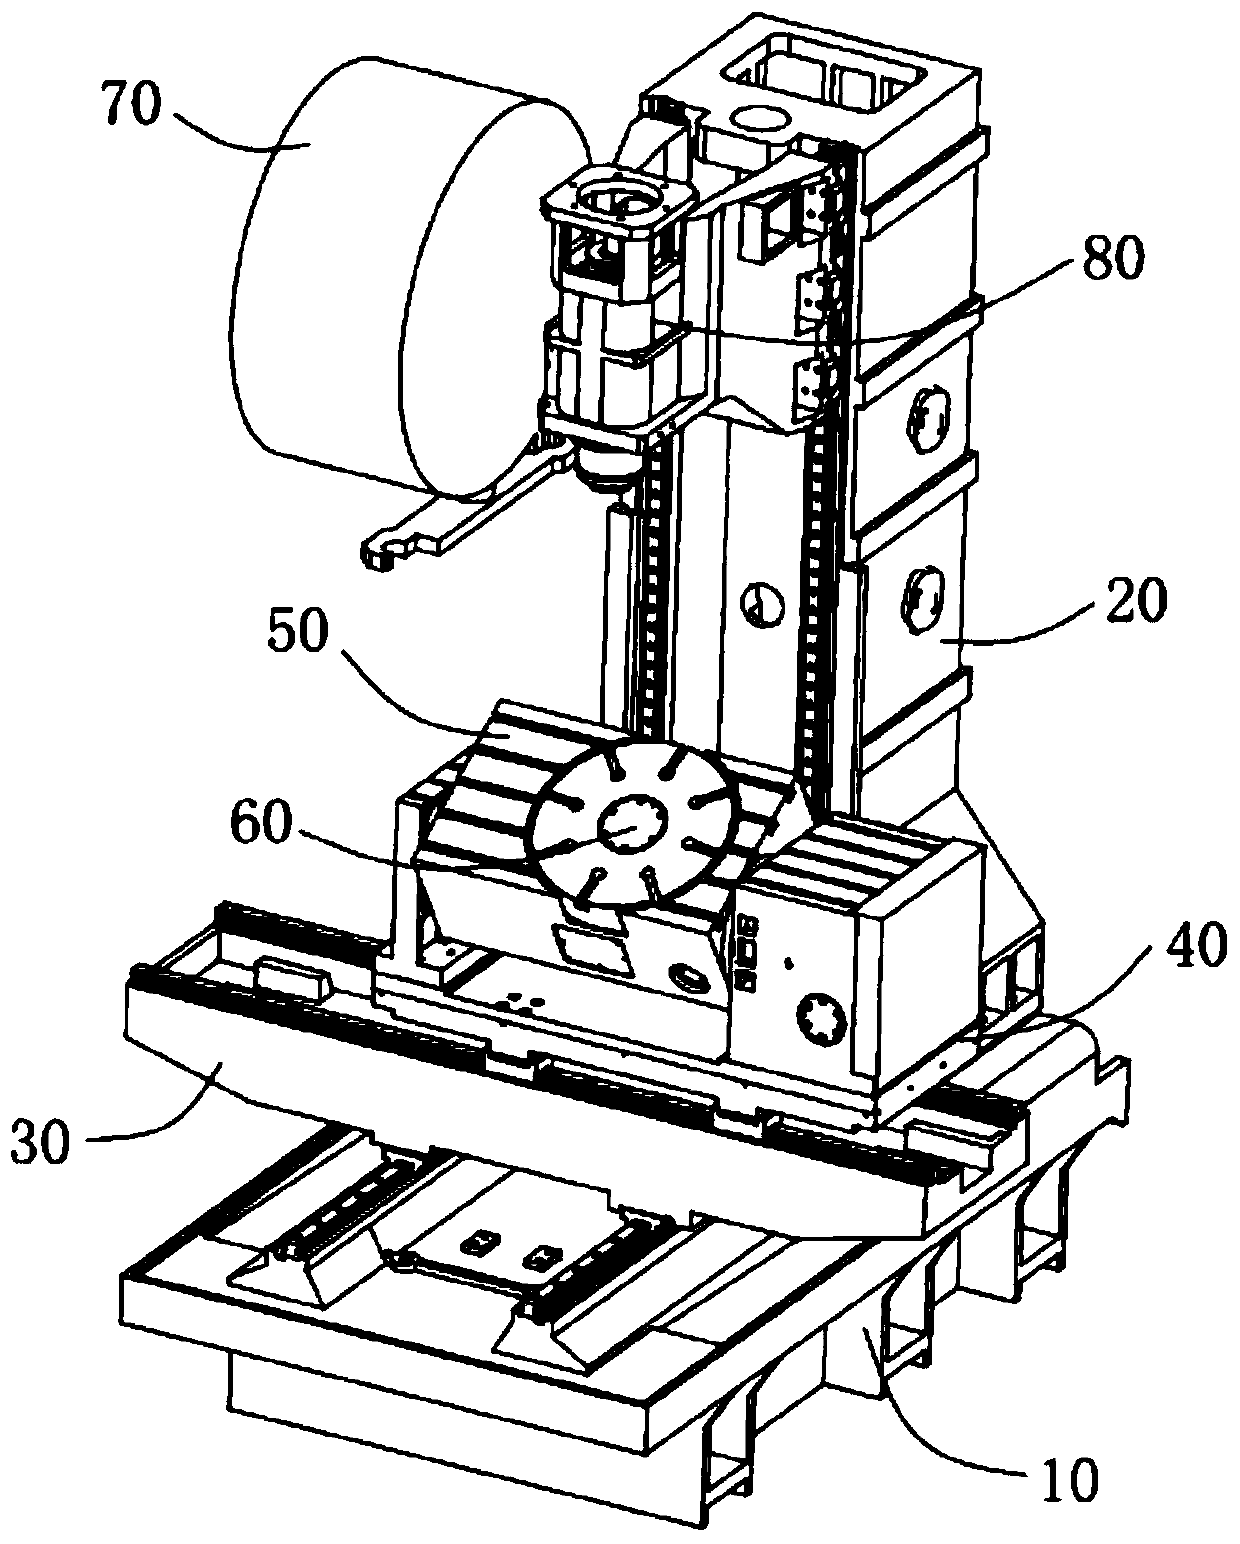 Efficient polyhedron processing machine tool